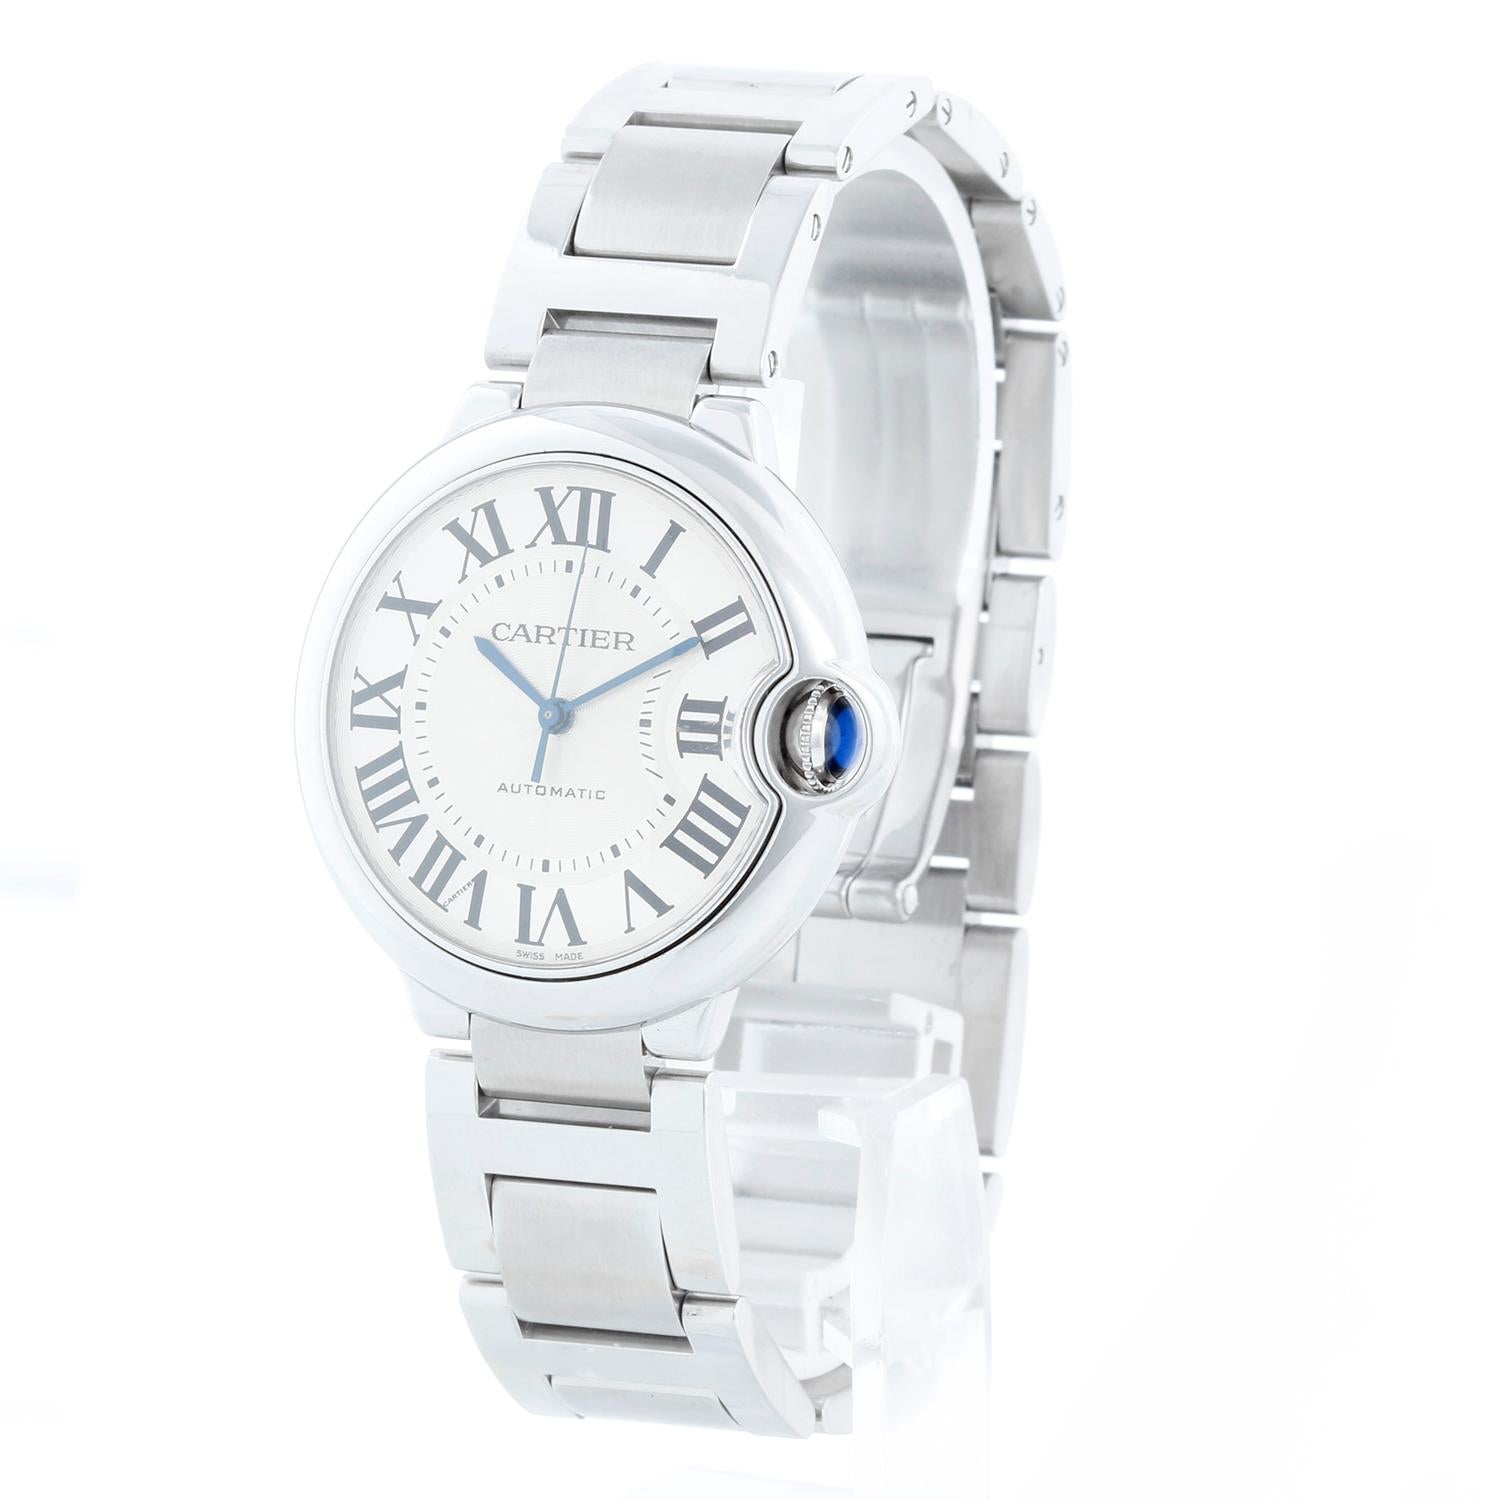 Cartier Ballon Bleu Midsize Stainless Steel Watch W6920046 3284 - Automatic. Stainless steel case (36mm). Silver guilloche dial with black Roman numerals. Stainless steel Cartier bracelet with deployant clasp.. Pre-owned with Cartier box, papers and